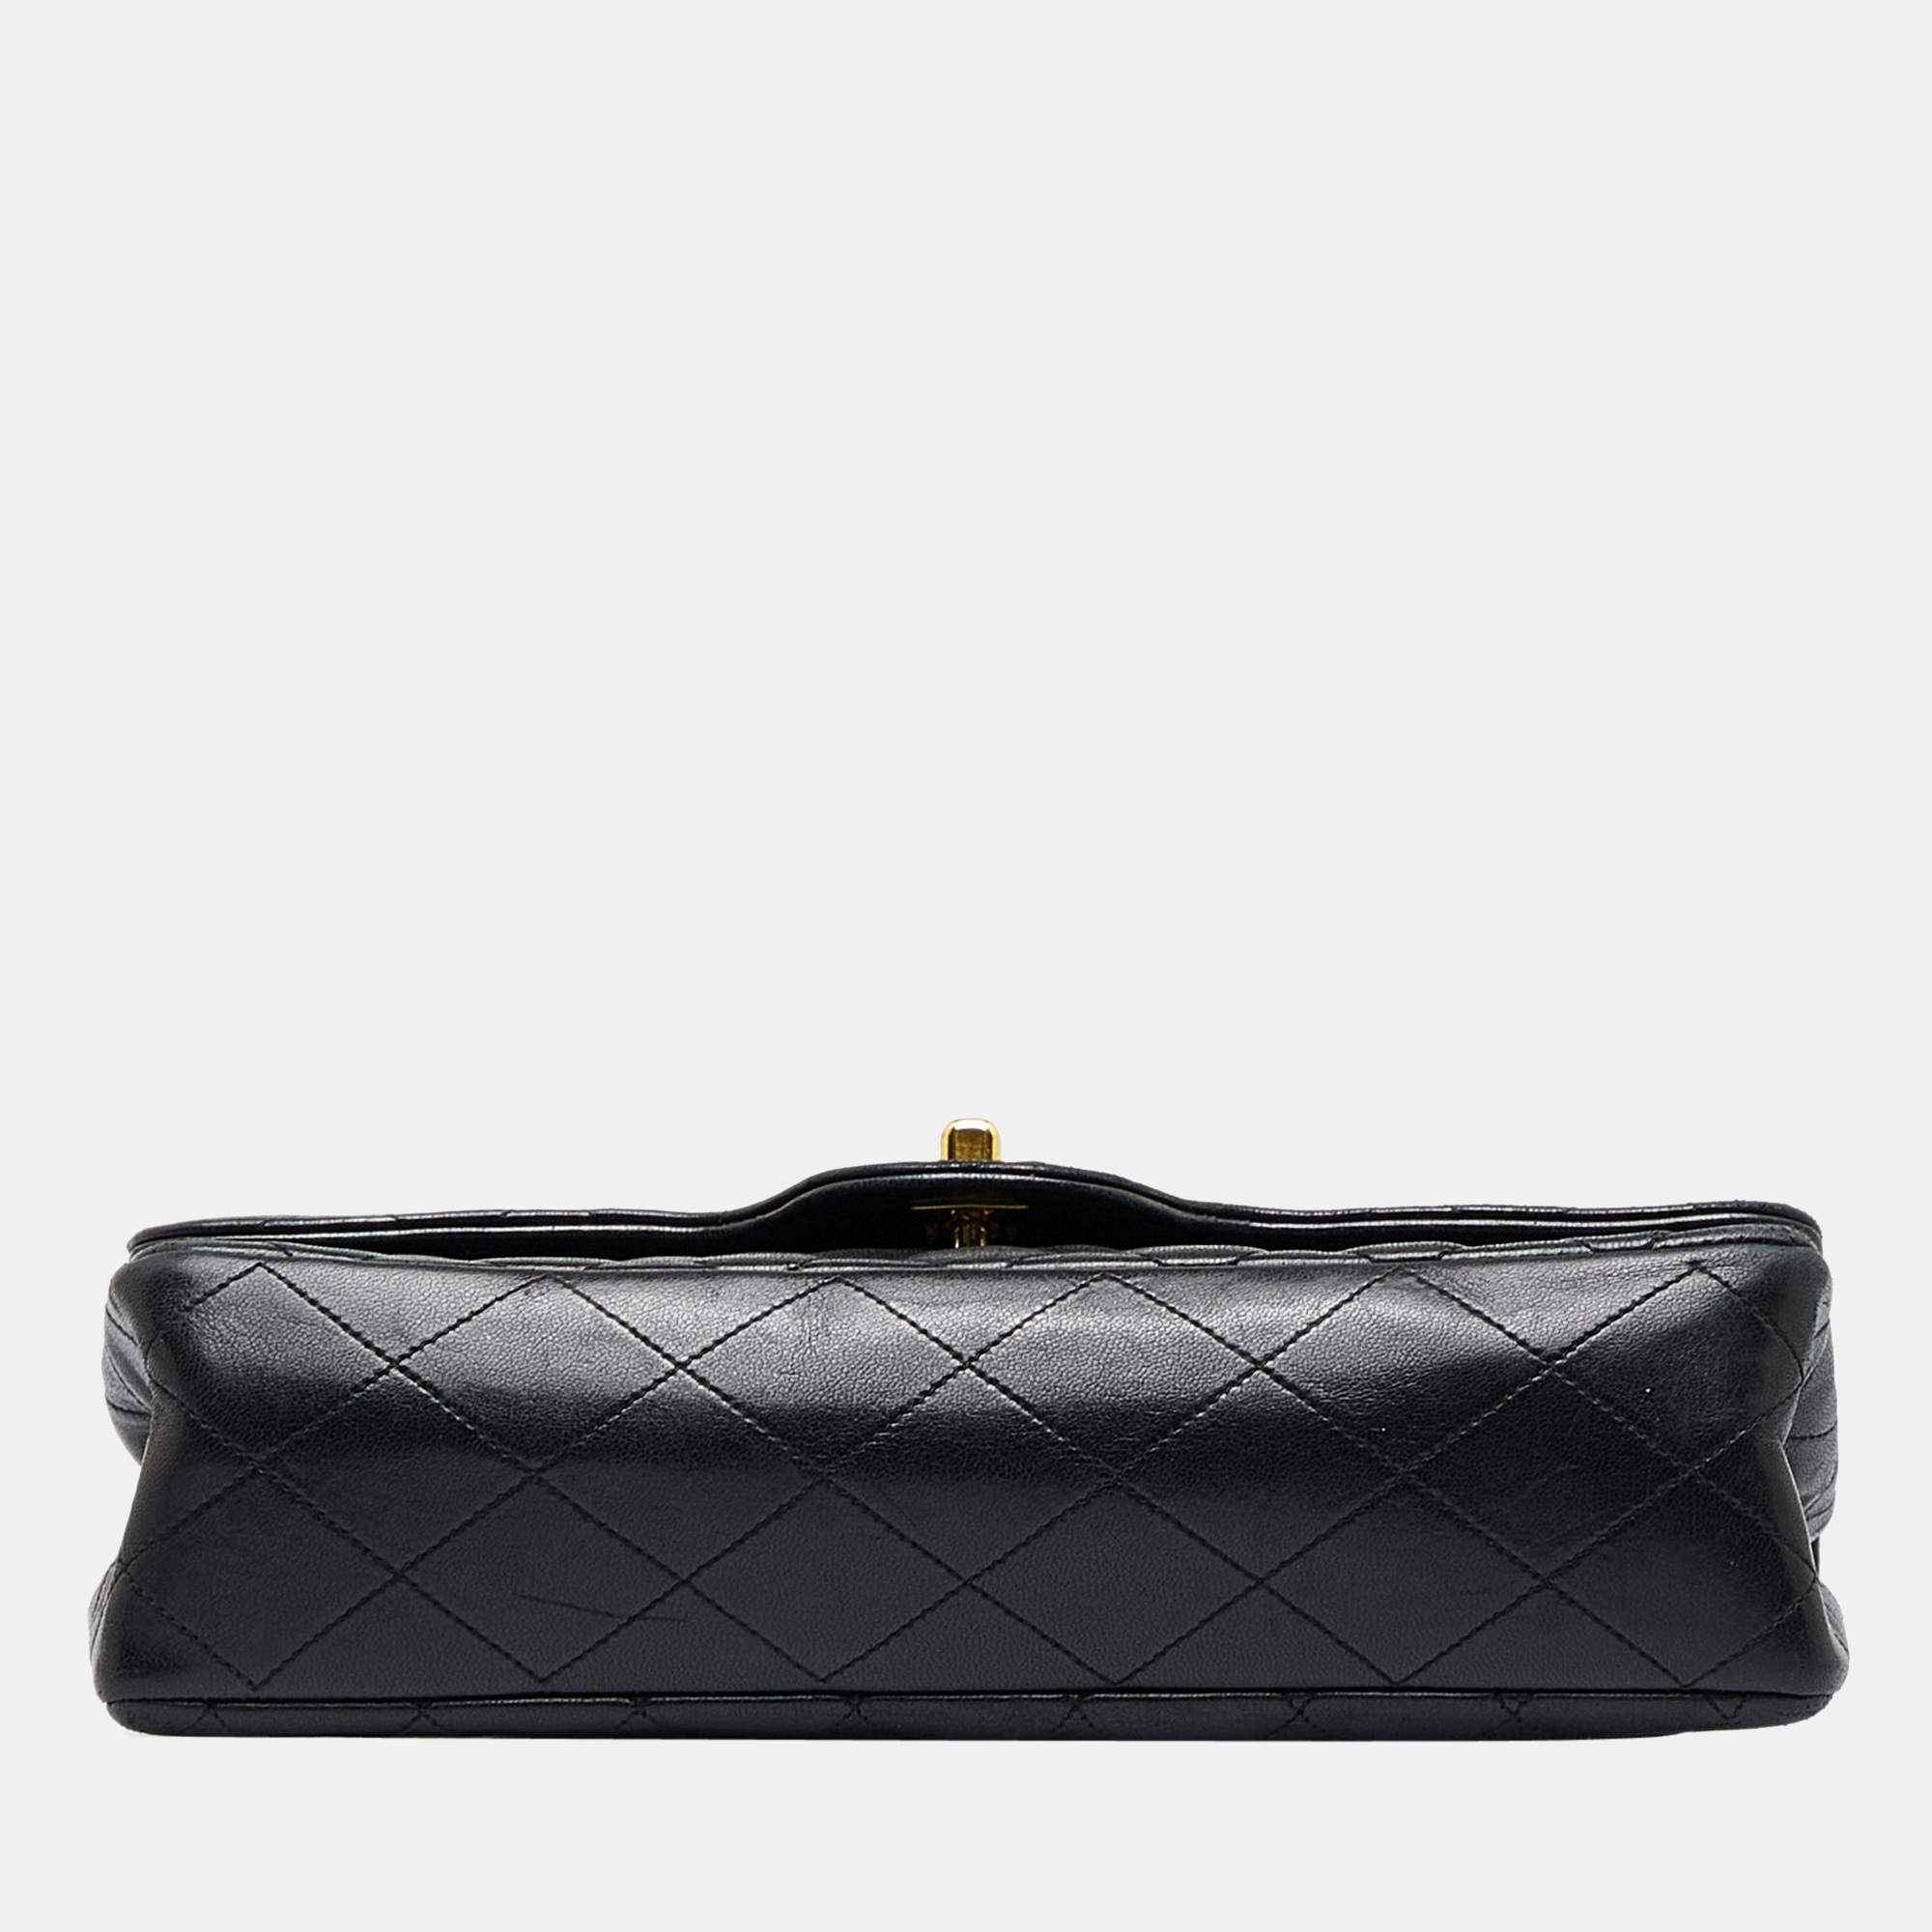 Chanel Black Quilted Lambskin Double Flap Bag